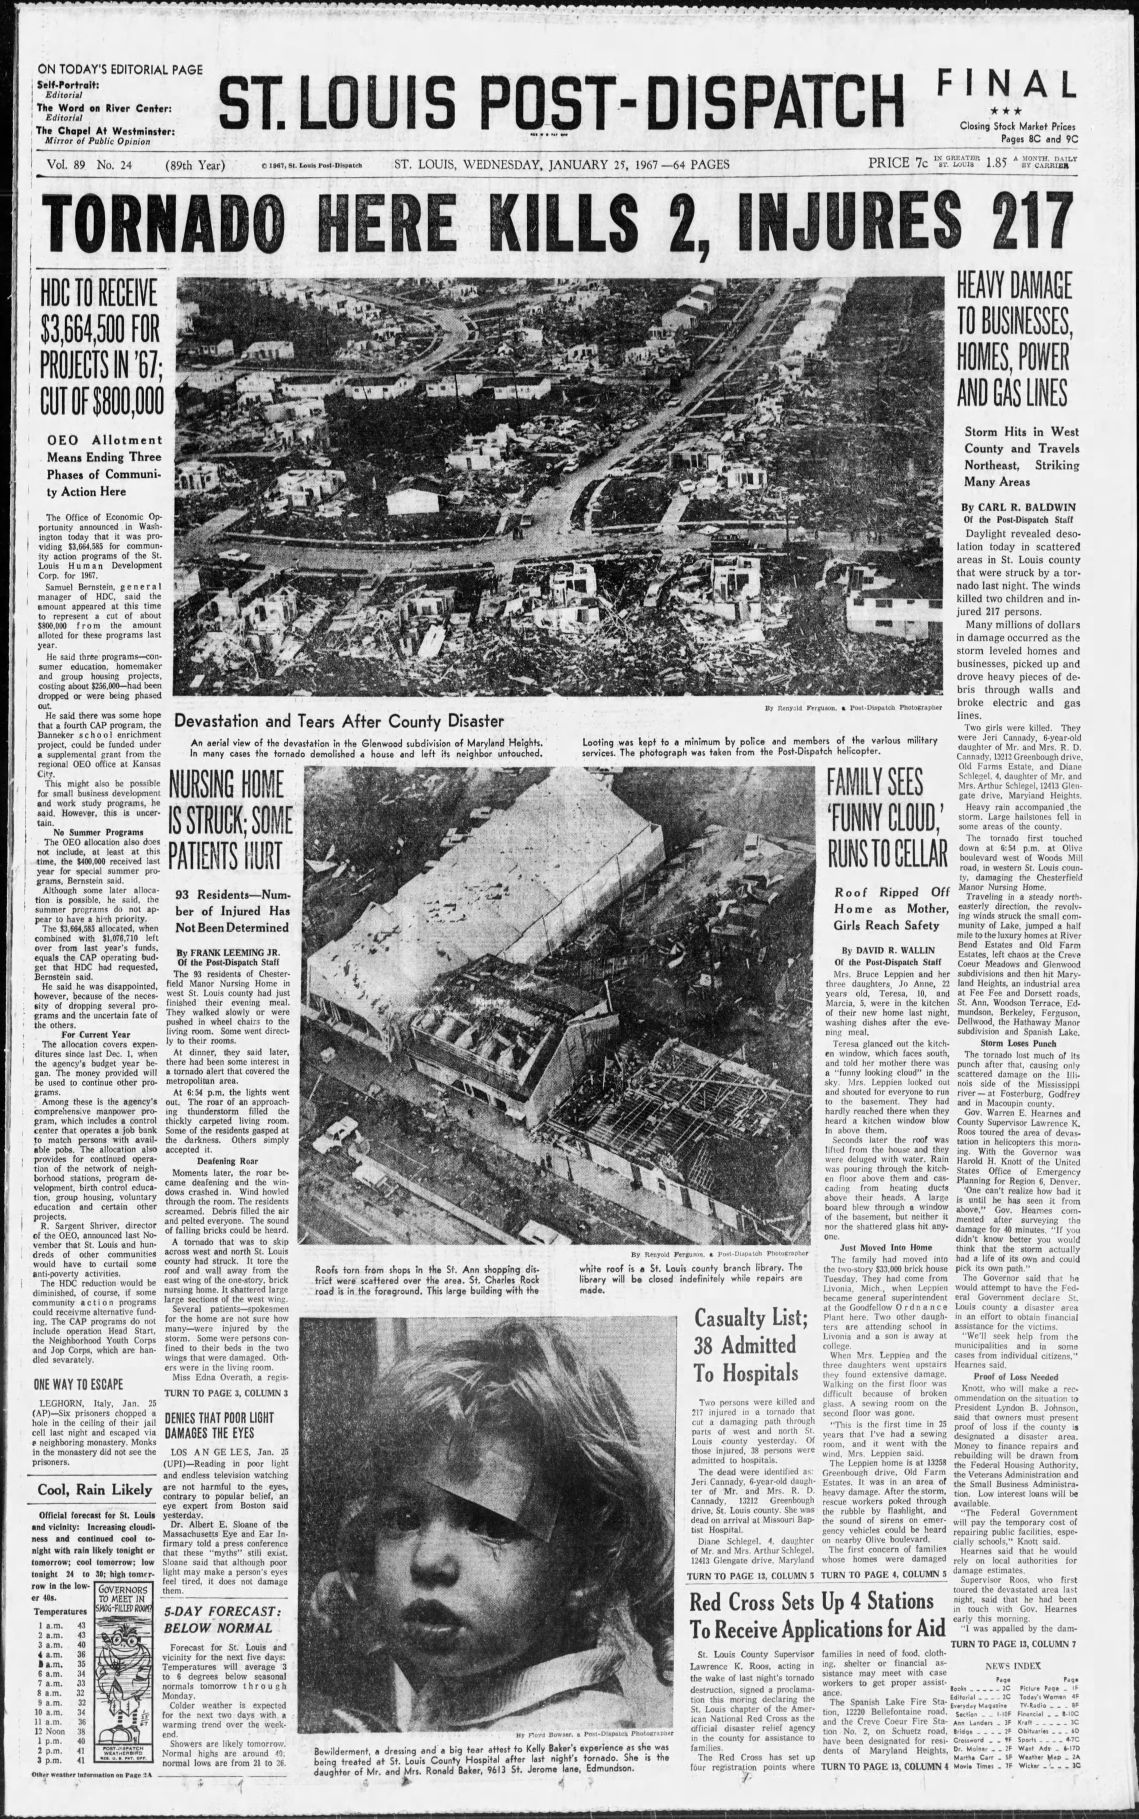 Post-Dispatch pages: The Tornado of 1967 | Post-Dispatch Archives | literacybasics.ca